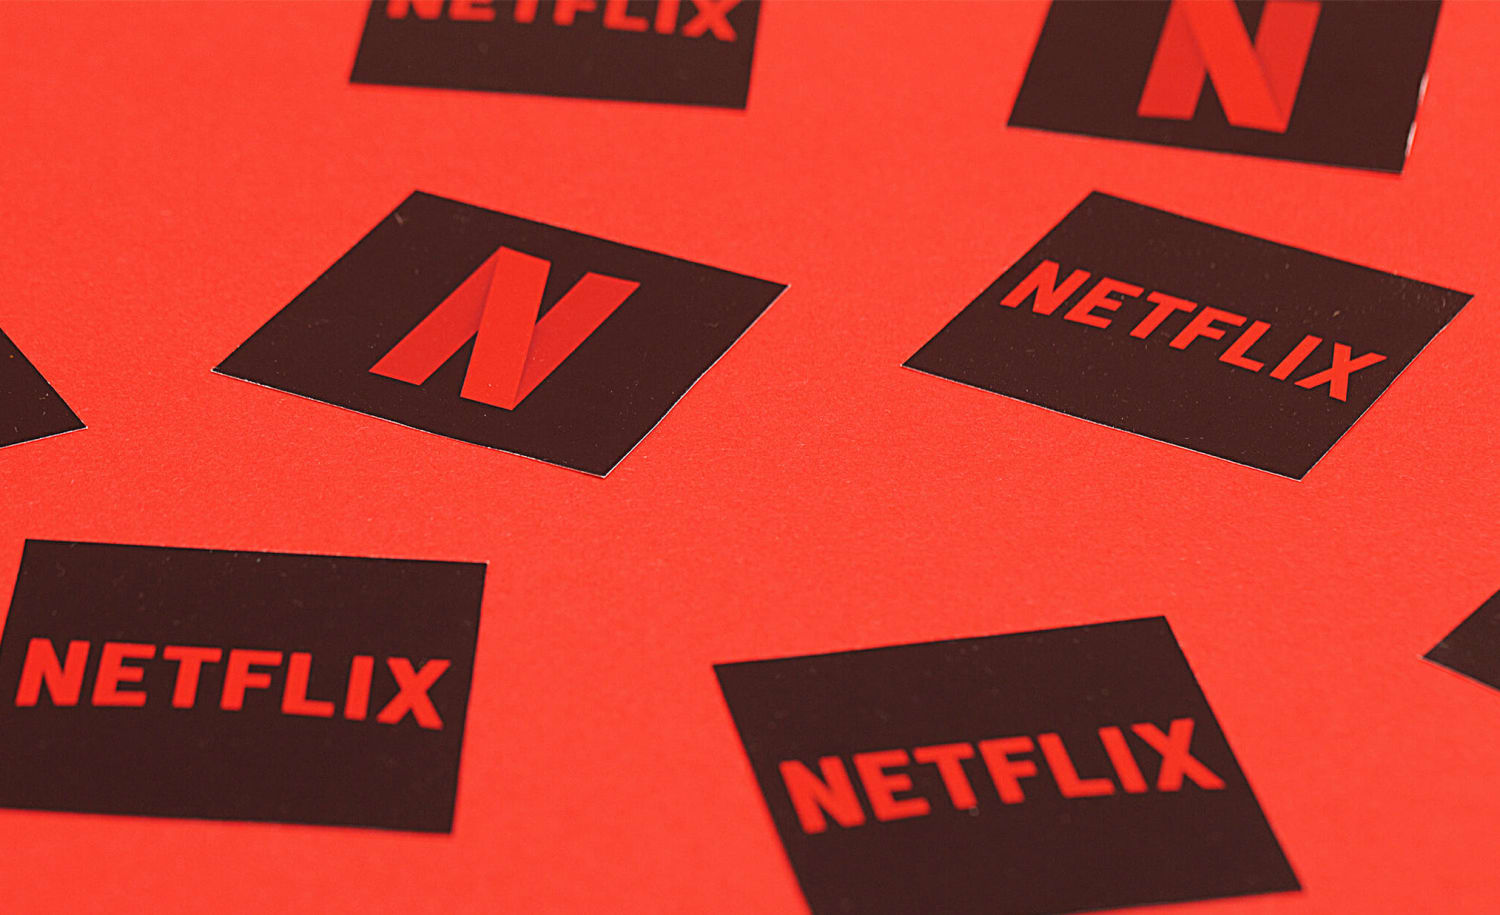 Netflix to move $100 million in cash deposits to lenders in Black communities